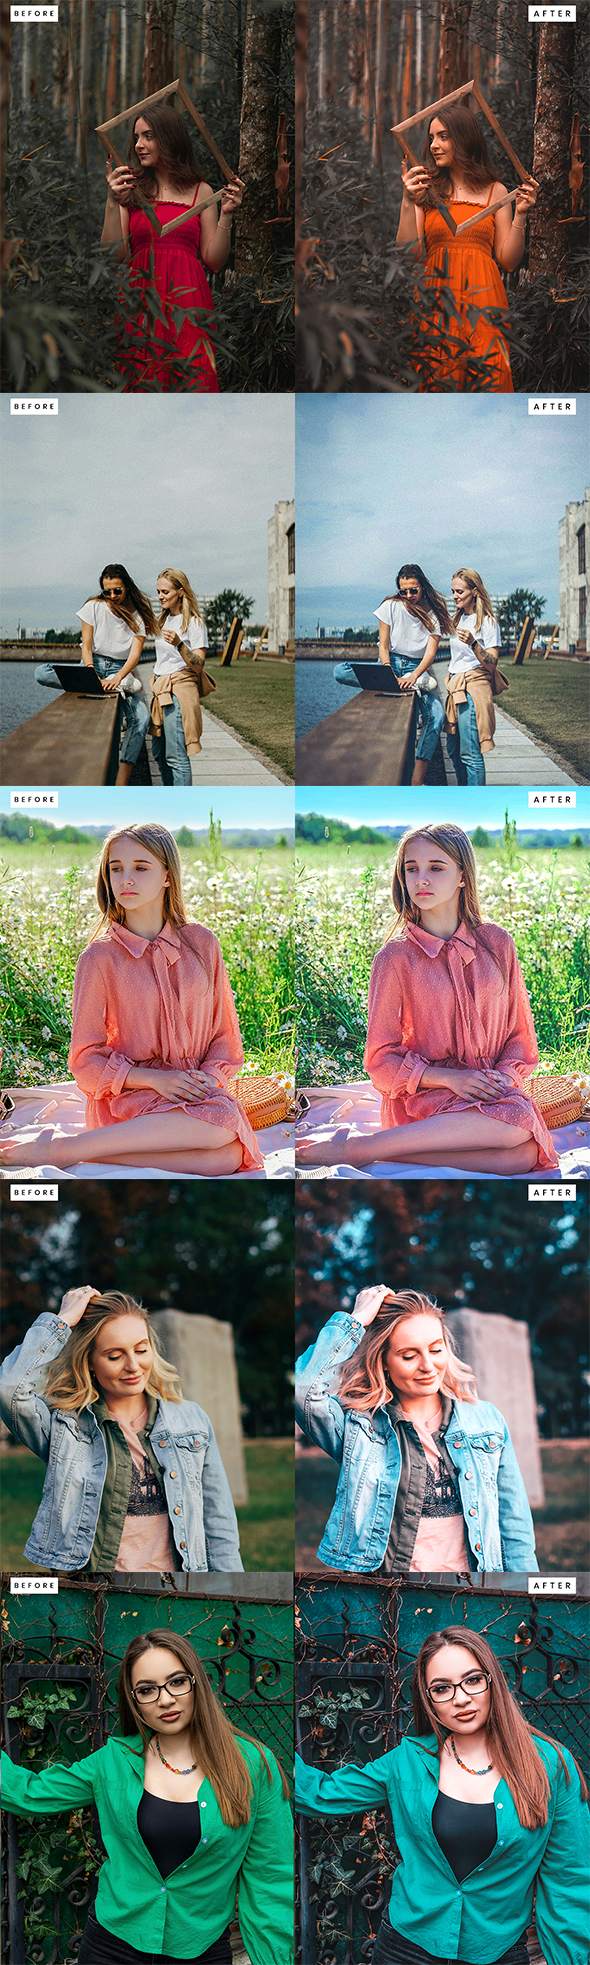 [DOWNLOAD]Outfit Photoshop Actions